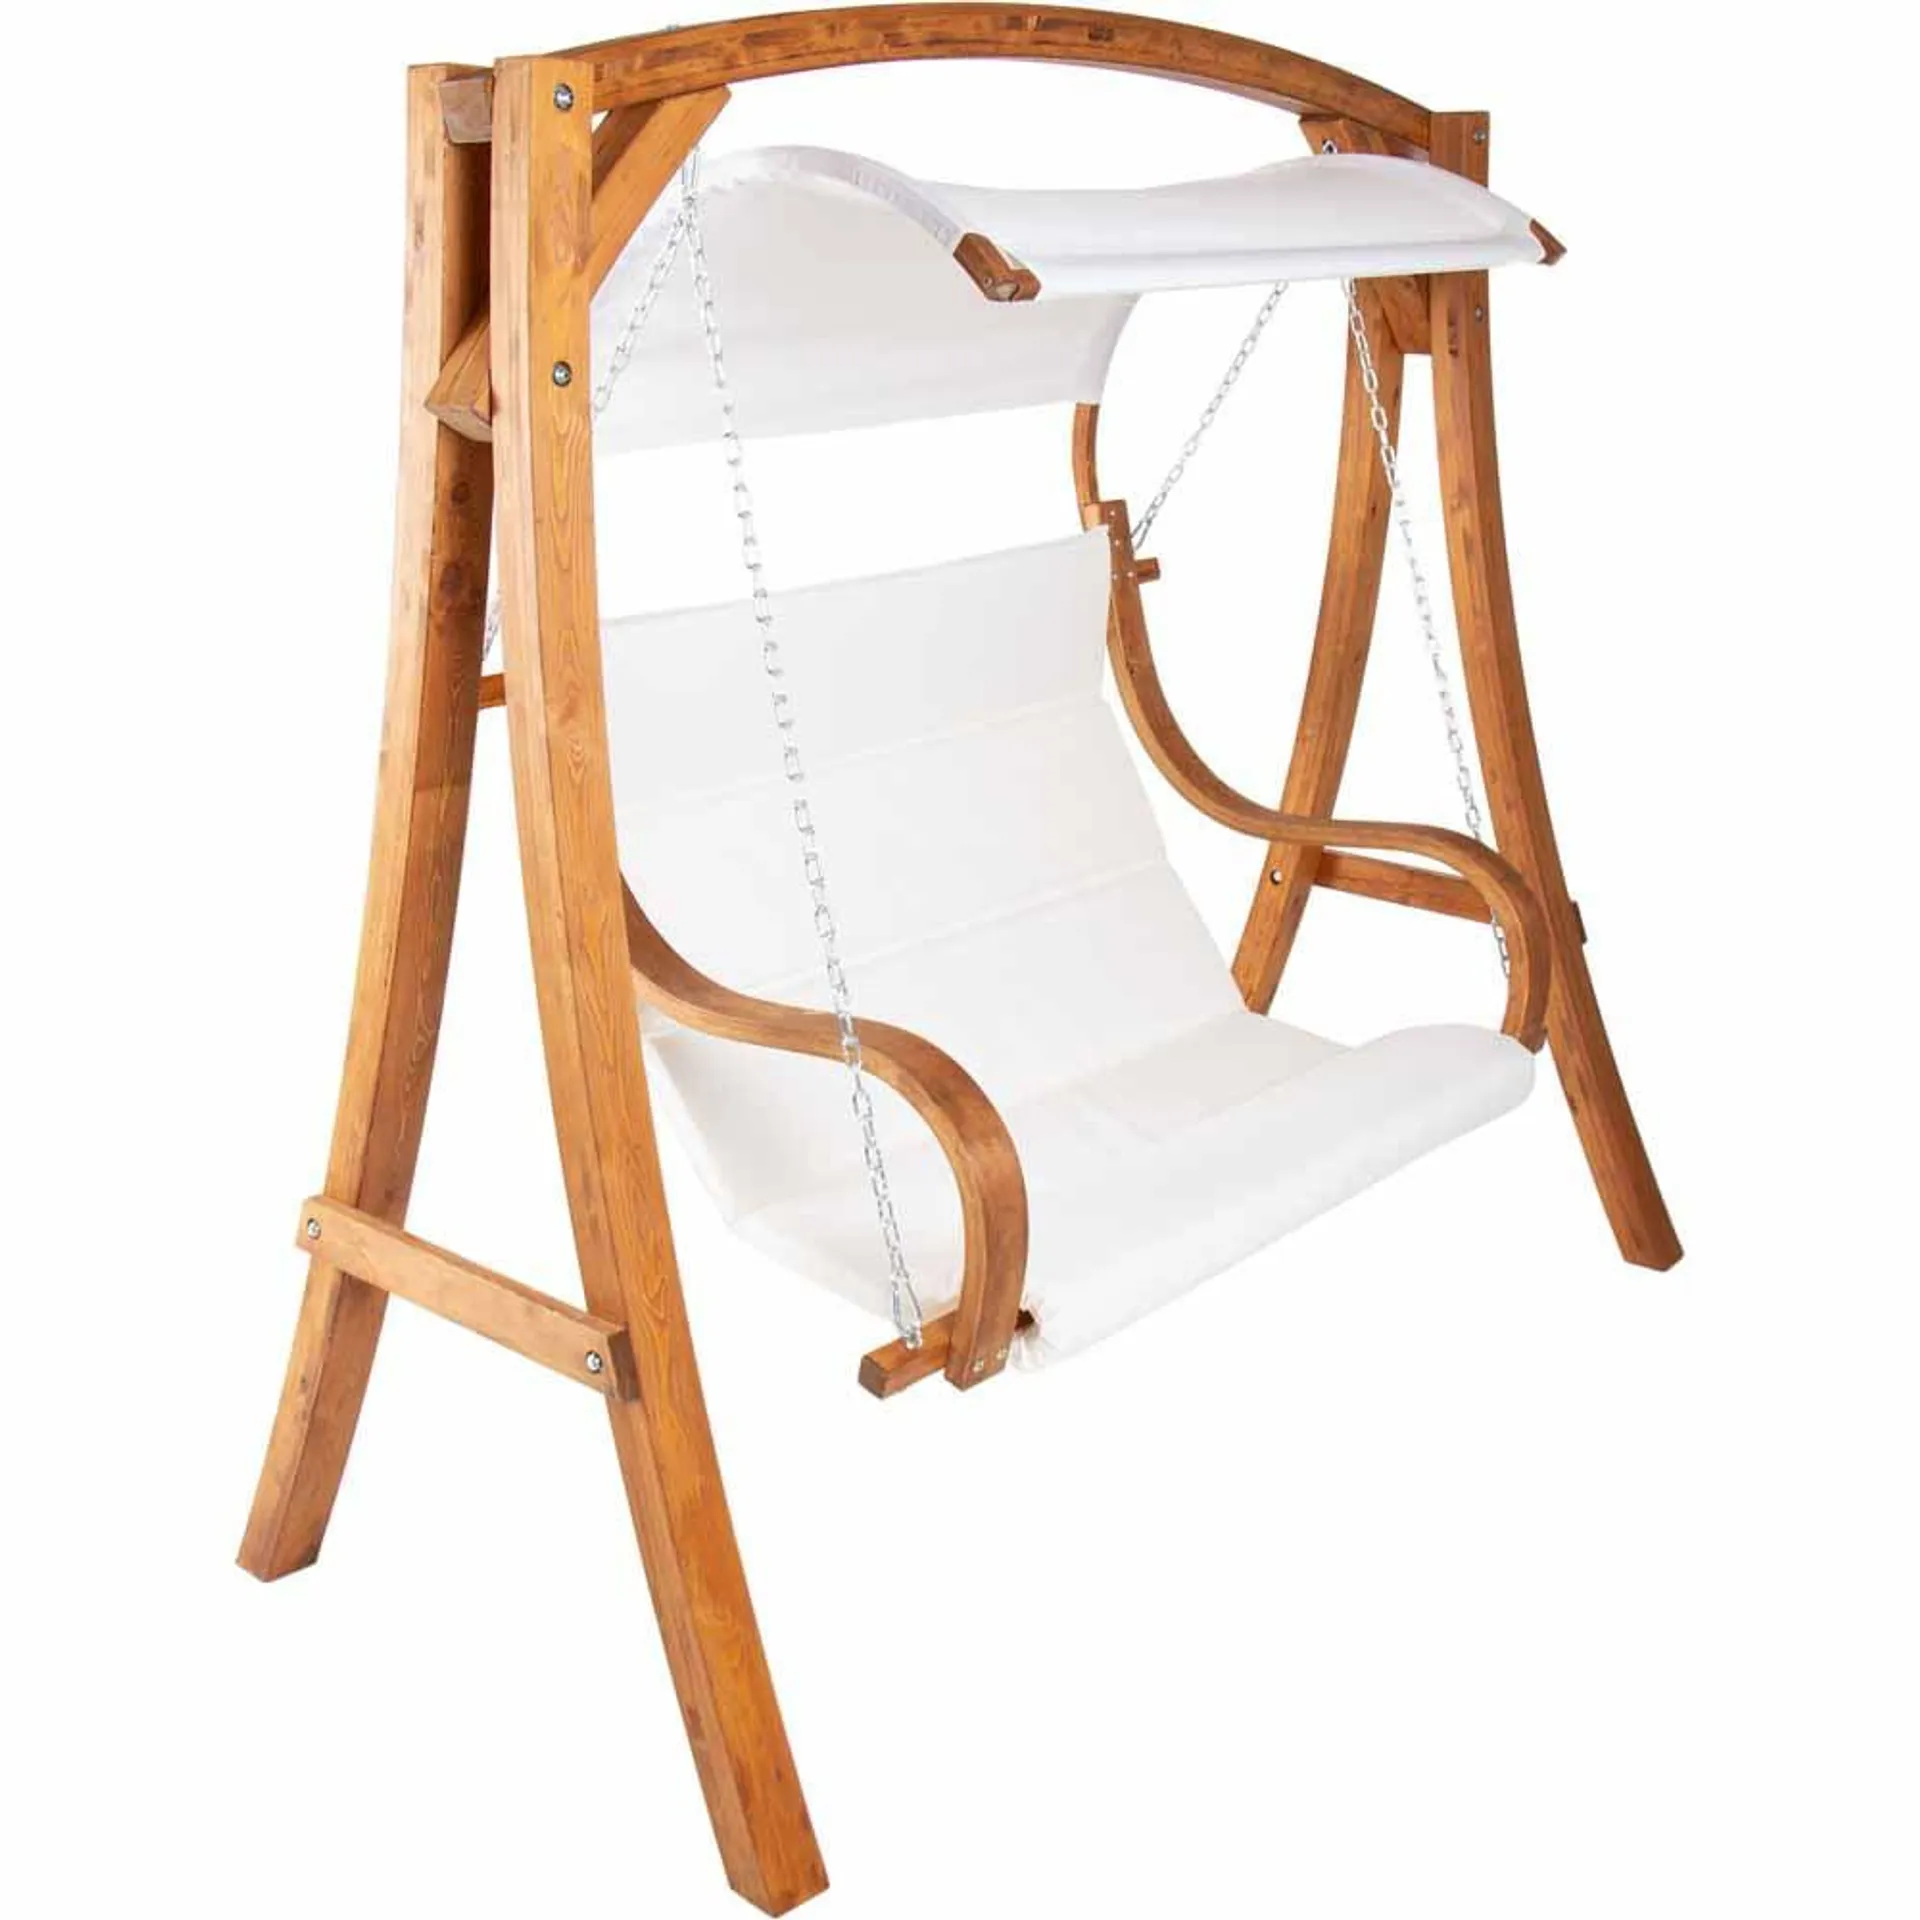 Charles Bentley 2 Seater Wooden Garden Swing Chair With Canopy